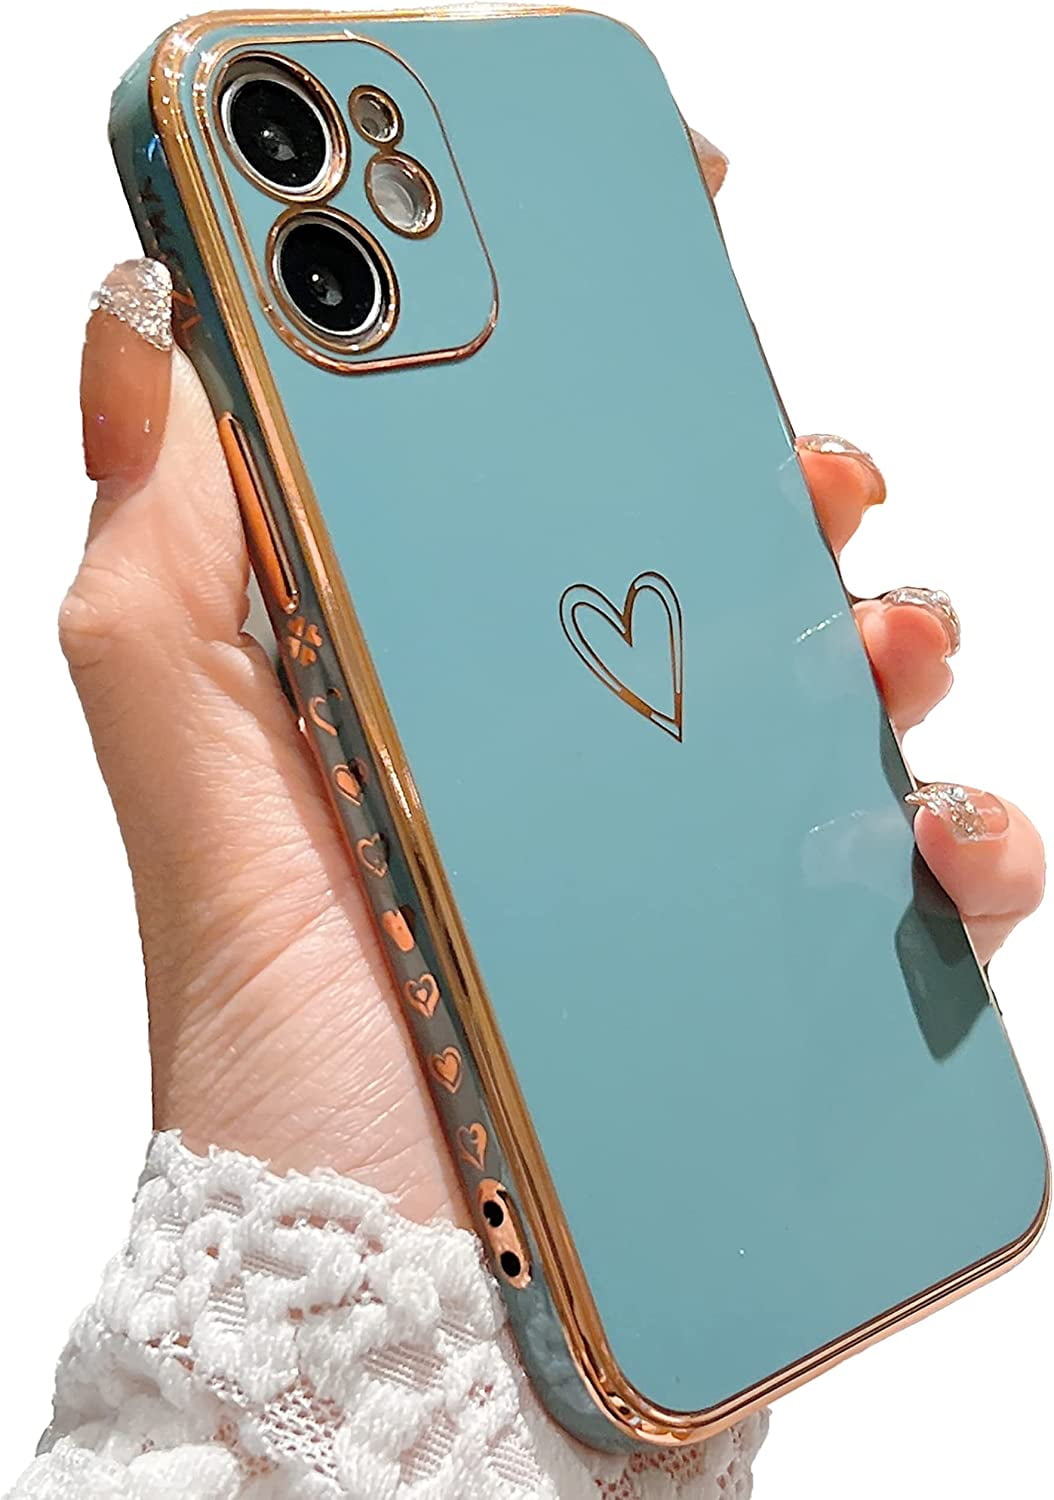 WindamazingStory Compatible with iPhone 12 Mini Case for Women Girl, Luxury Plating Edge Bumper Cute Case with Full Camera Lens Protection Cover for iPhone 12 Mini 5.4